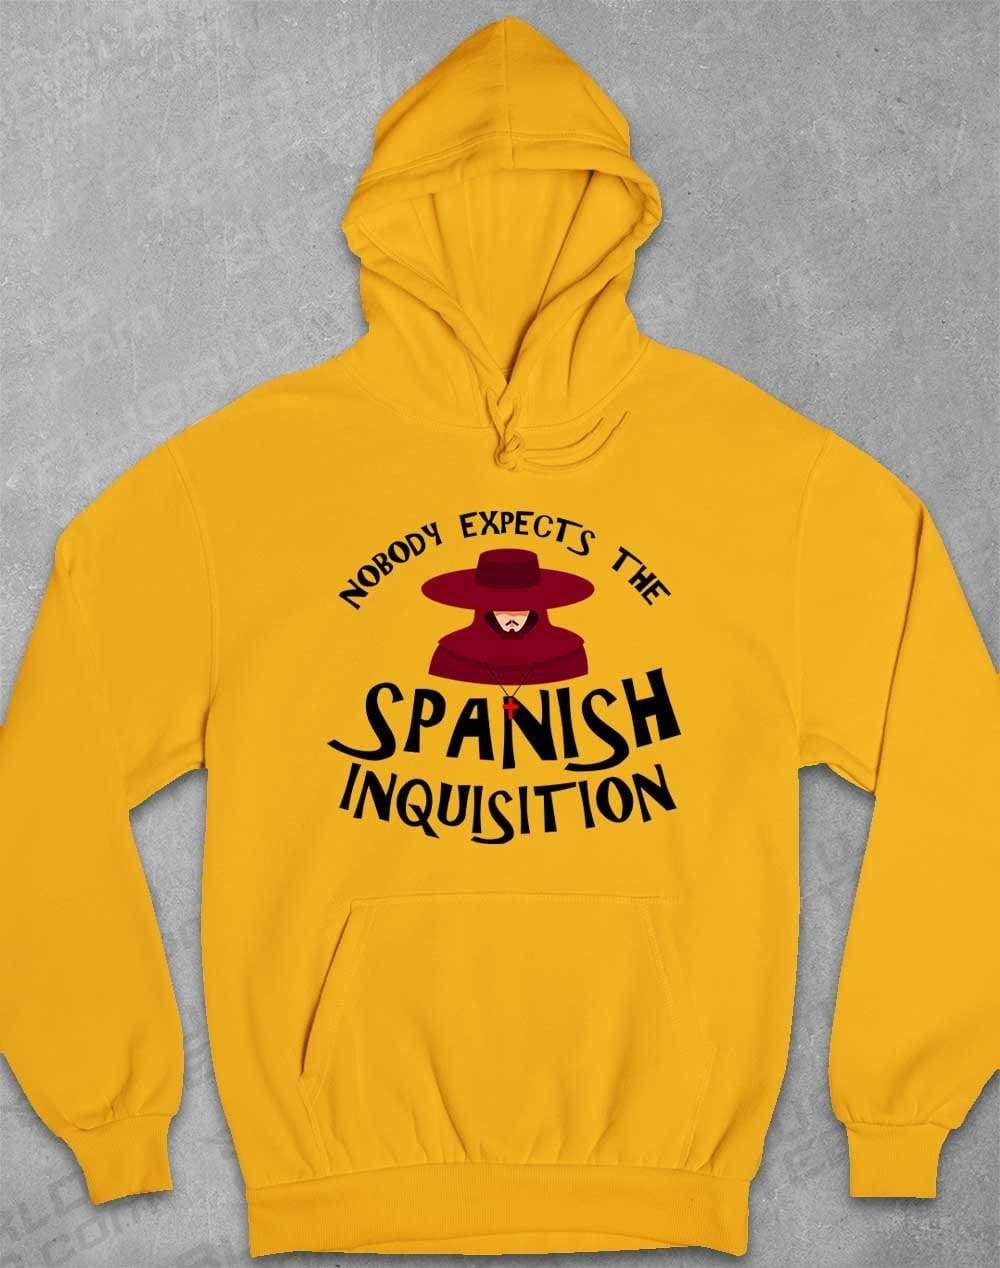 Nobody Expects the Spanish Inquisition Hoodie XS / Gold  - Off World Tees